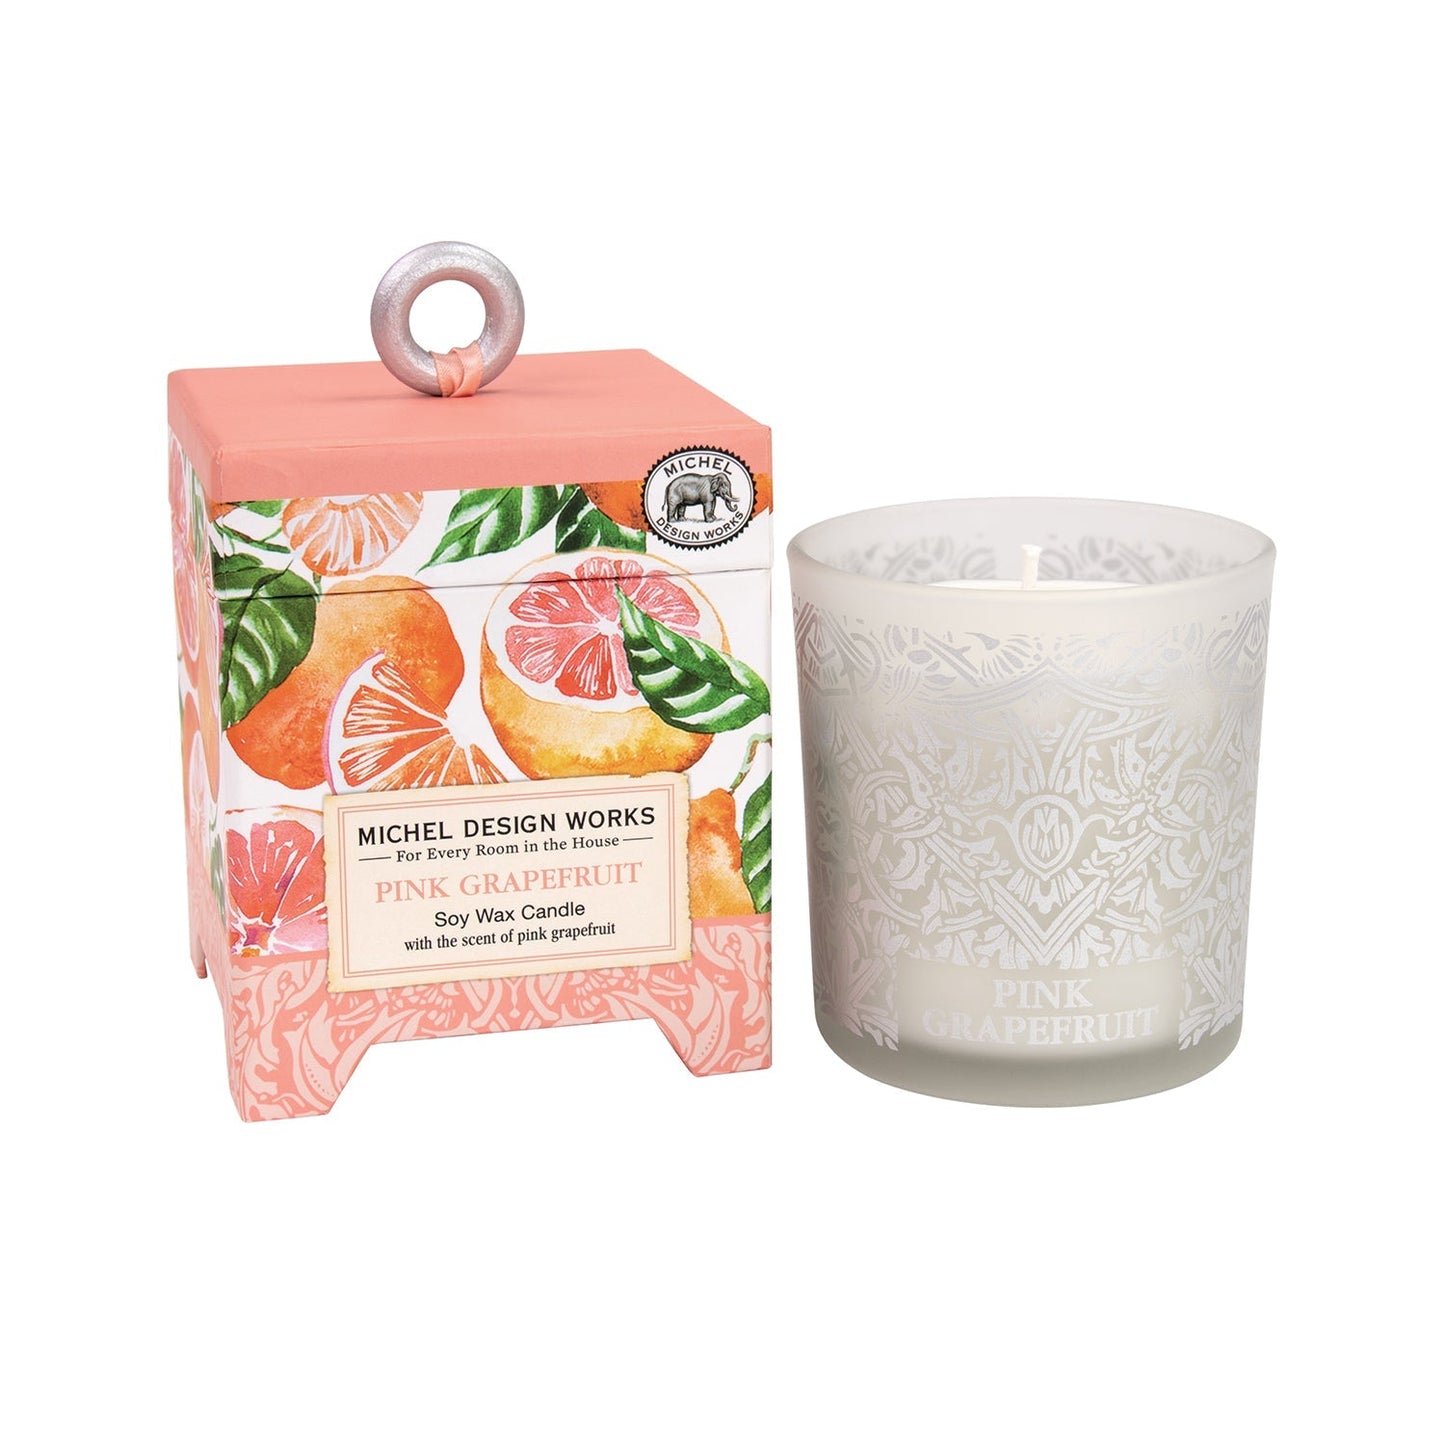 Pink Grapefruit 6.5 oz. Soy Wax Candle Invigorating Scent, Charming Design